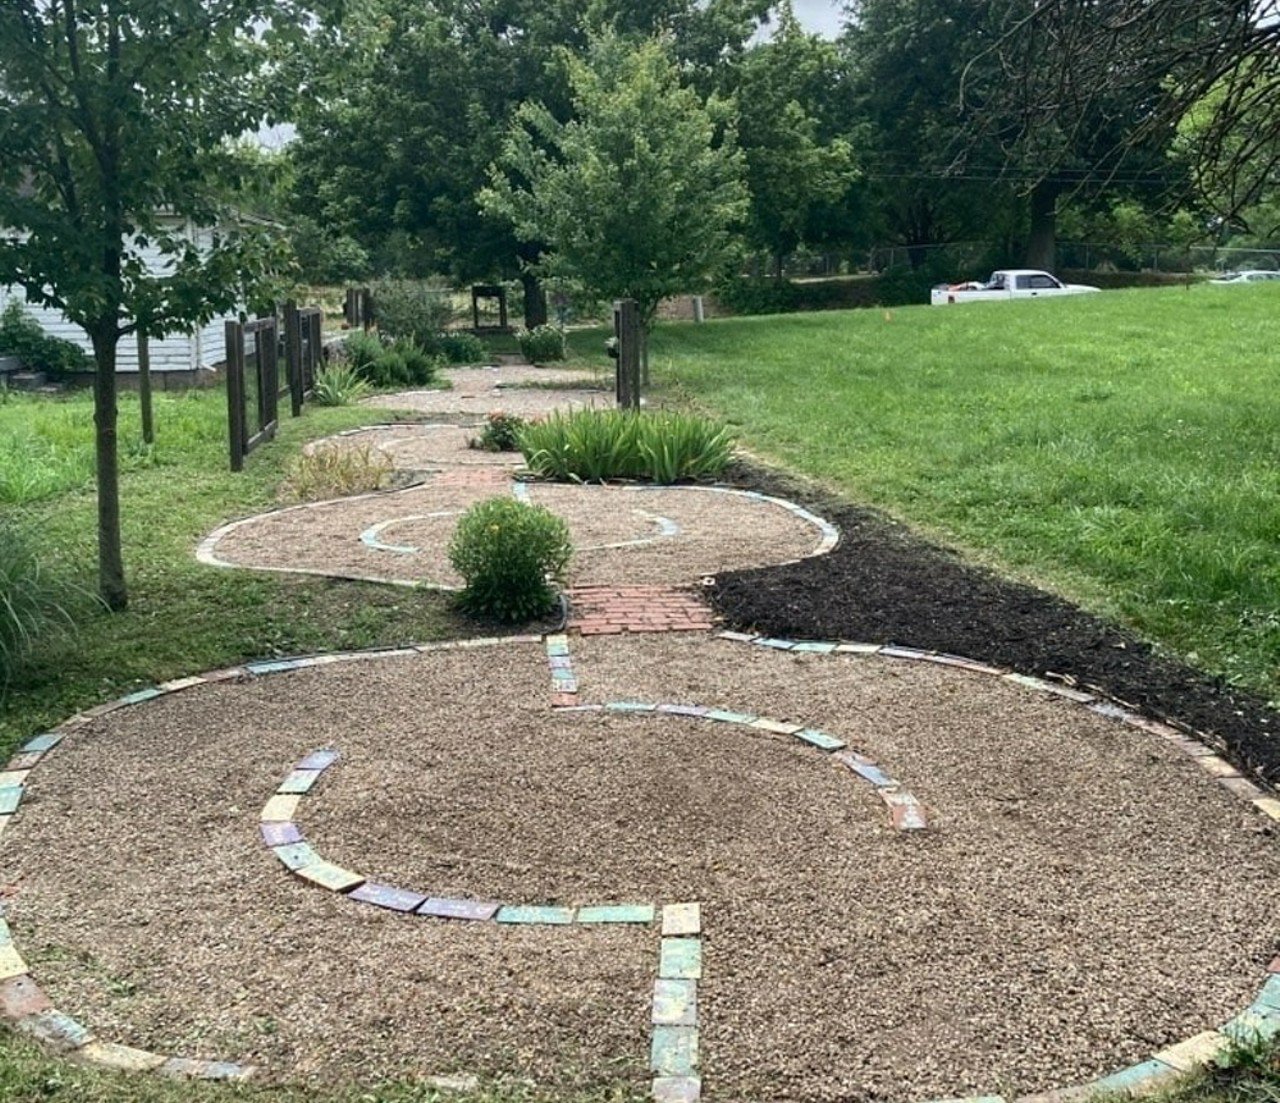  West Louisville Women's Collaborative 
3831 Hale Ave. 
Always open. Connected labyrinths outlined by bricks painted with inspirational messages.
Photo via facebook.com/westlouisvillewomenscollaborative